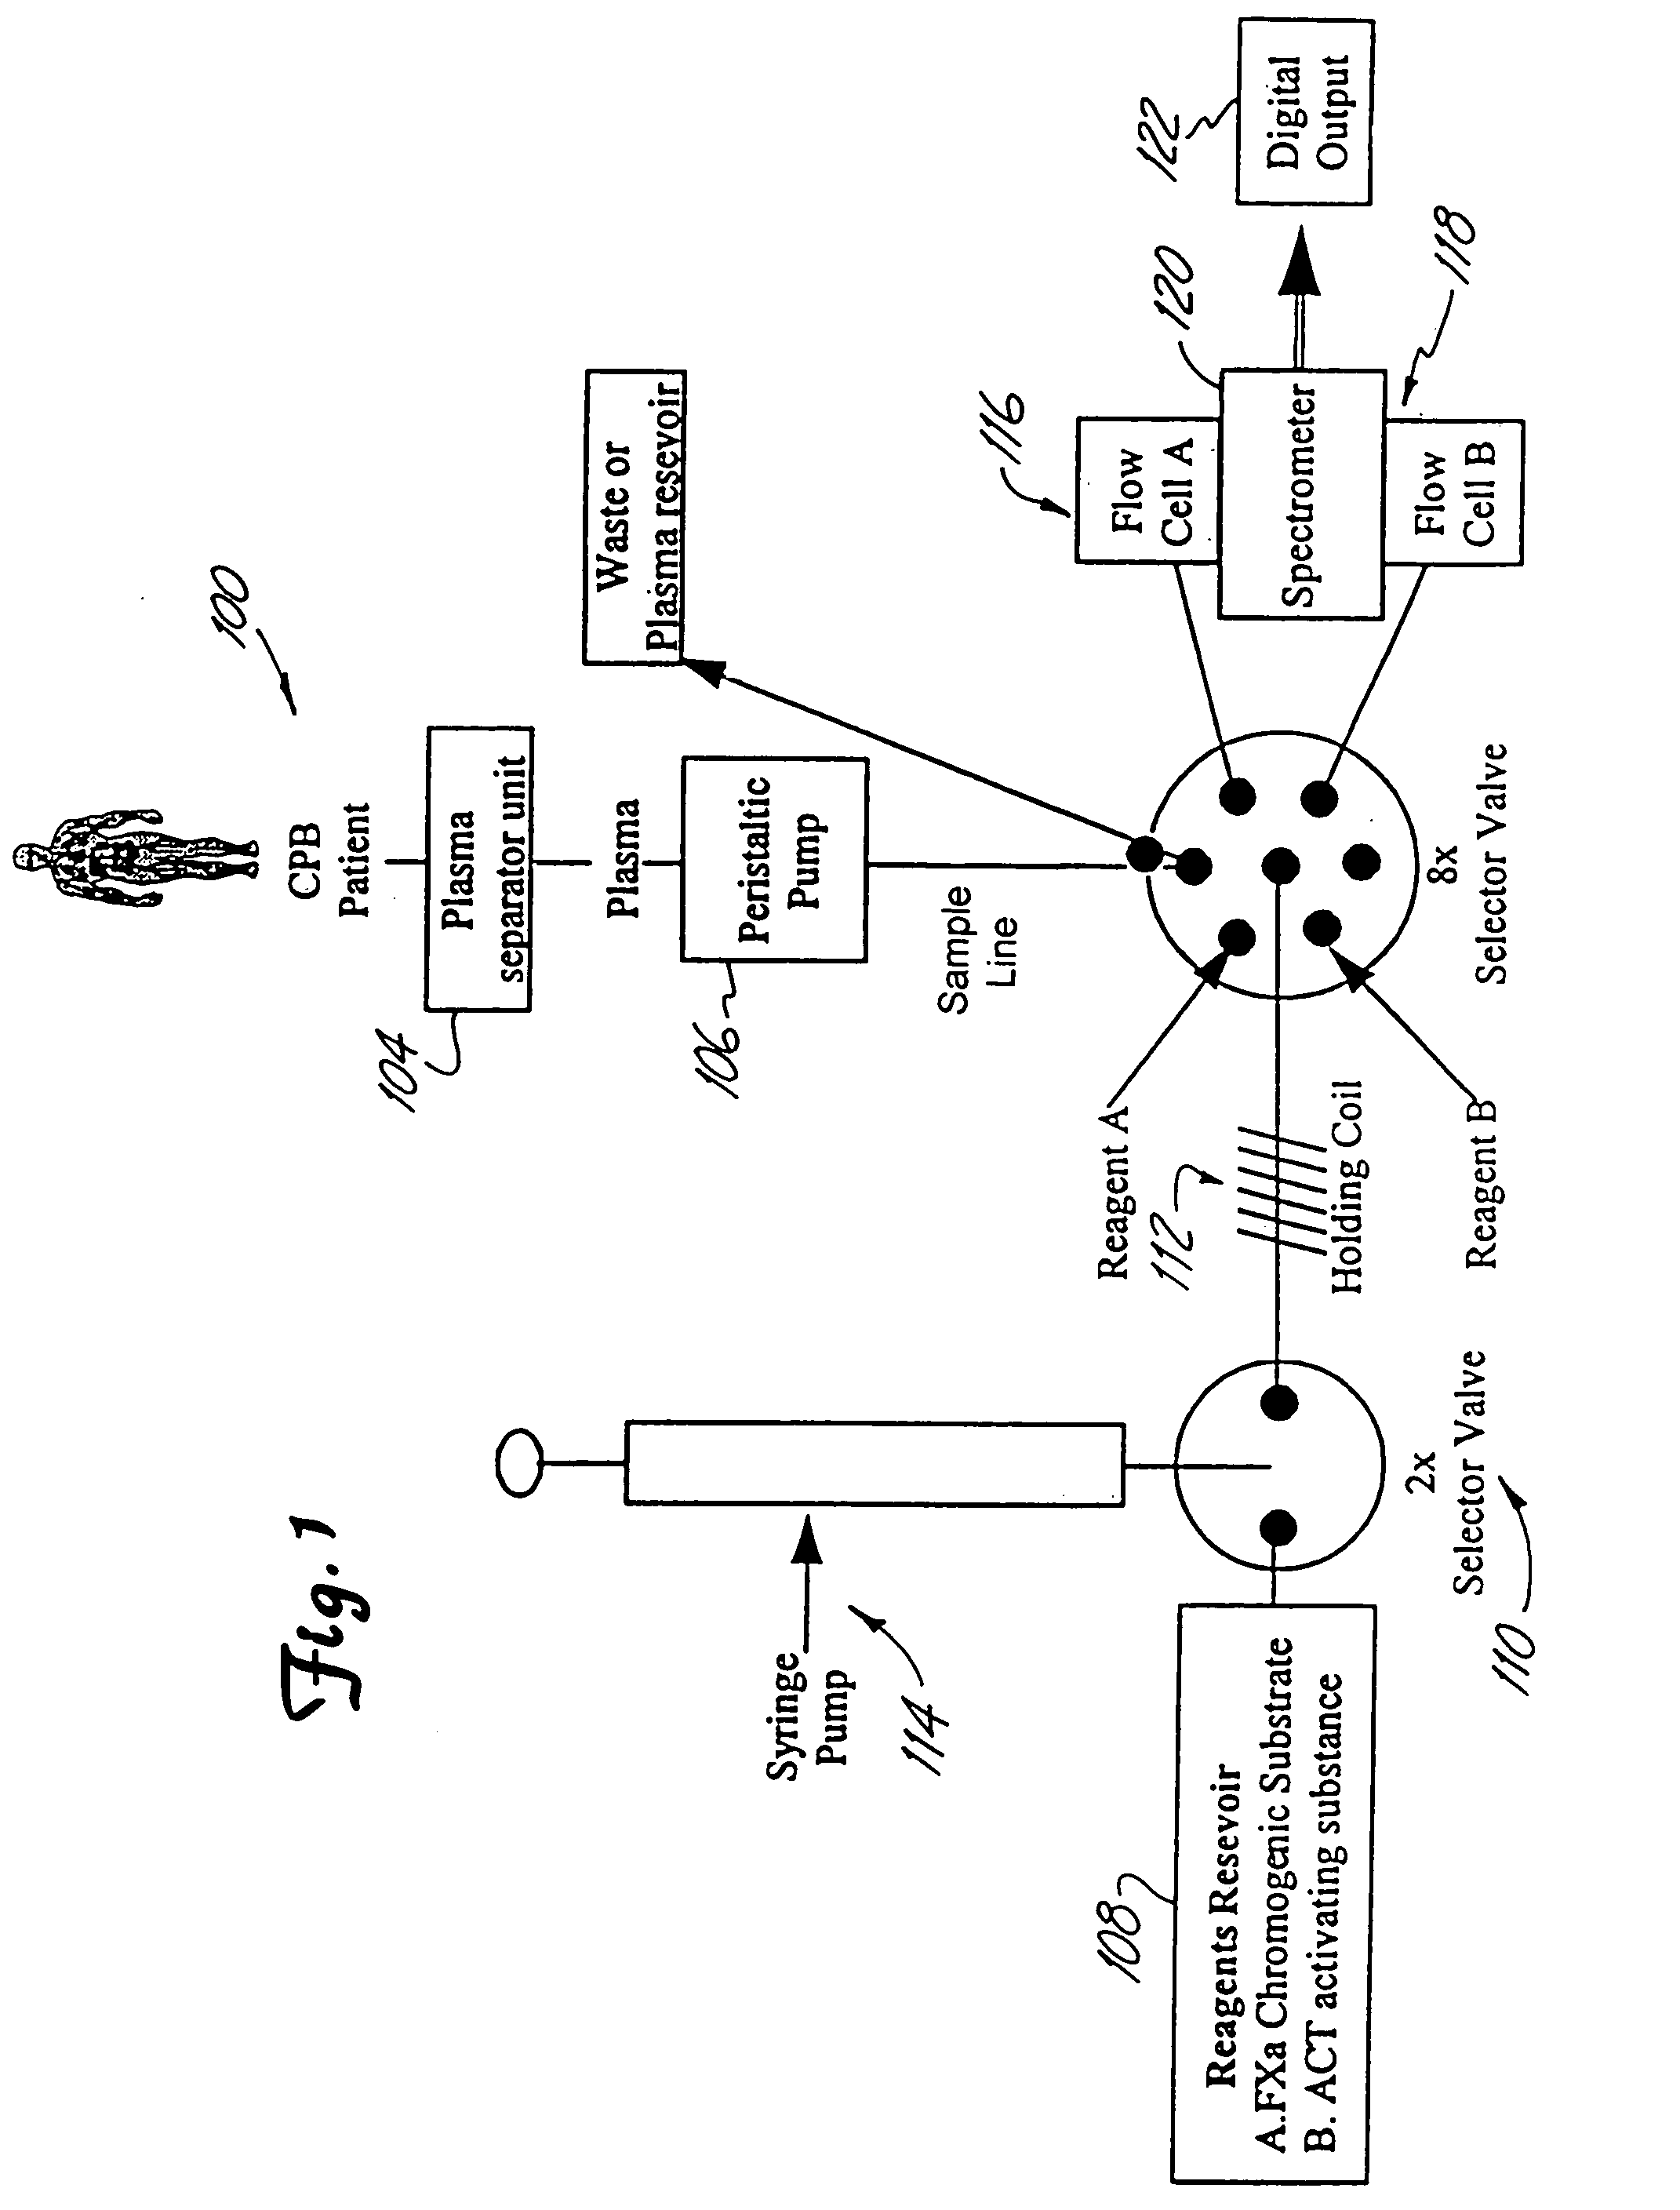 Hemostatic system and components for extracorporeal circuit